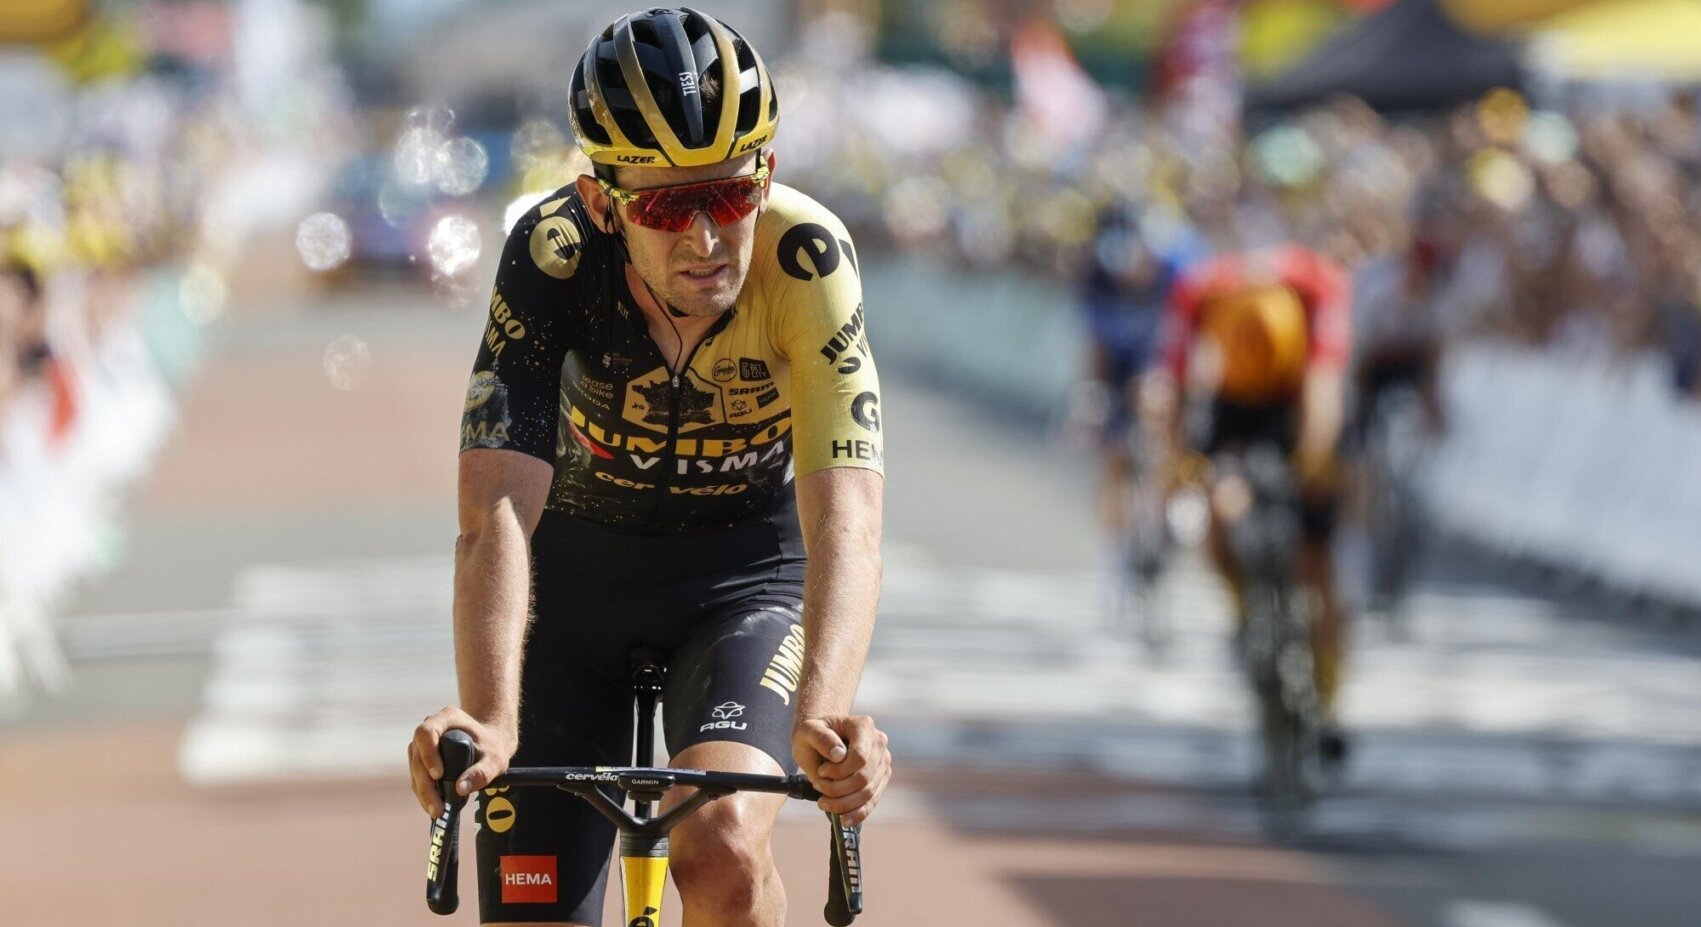 Benoot attacks and finishes fourth in twelfth stage Tour de France	